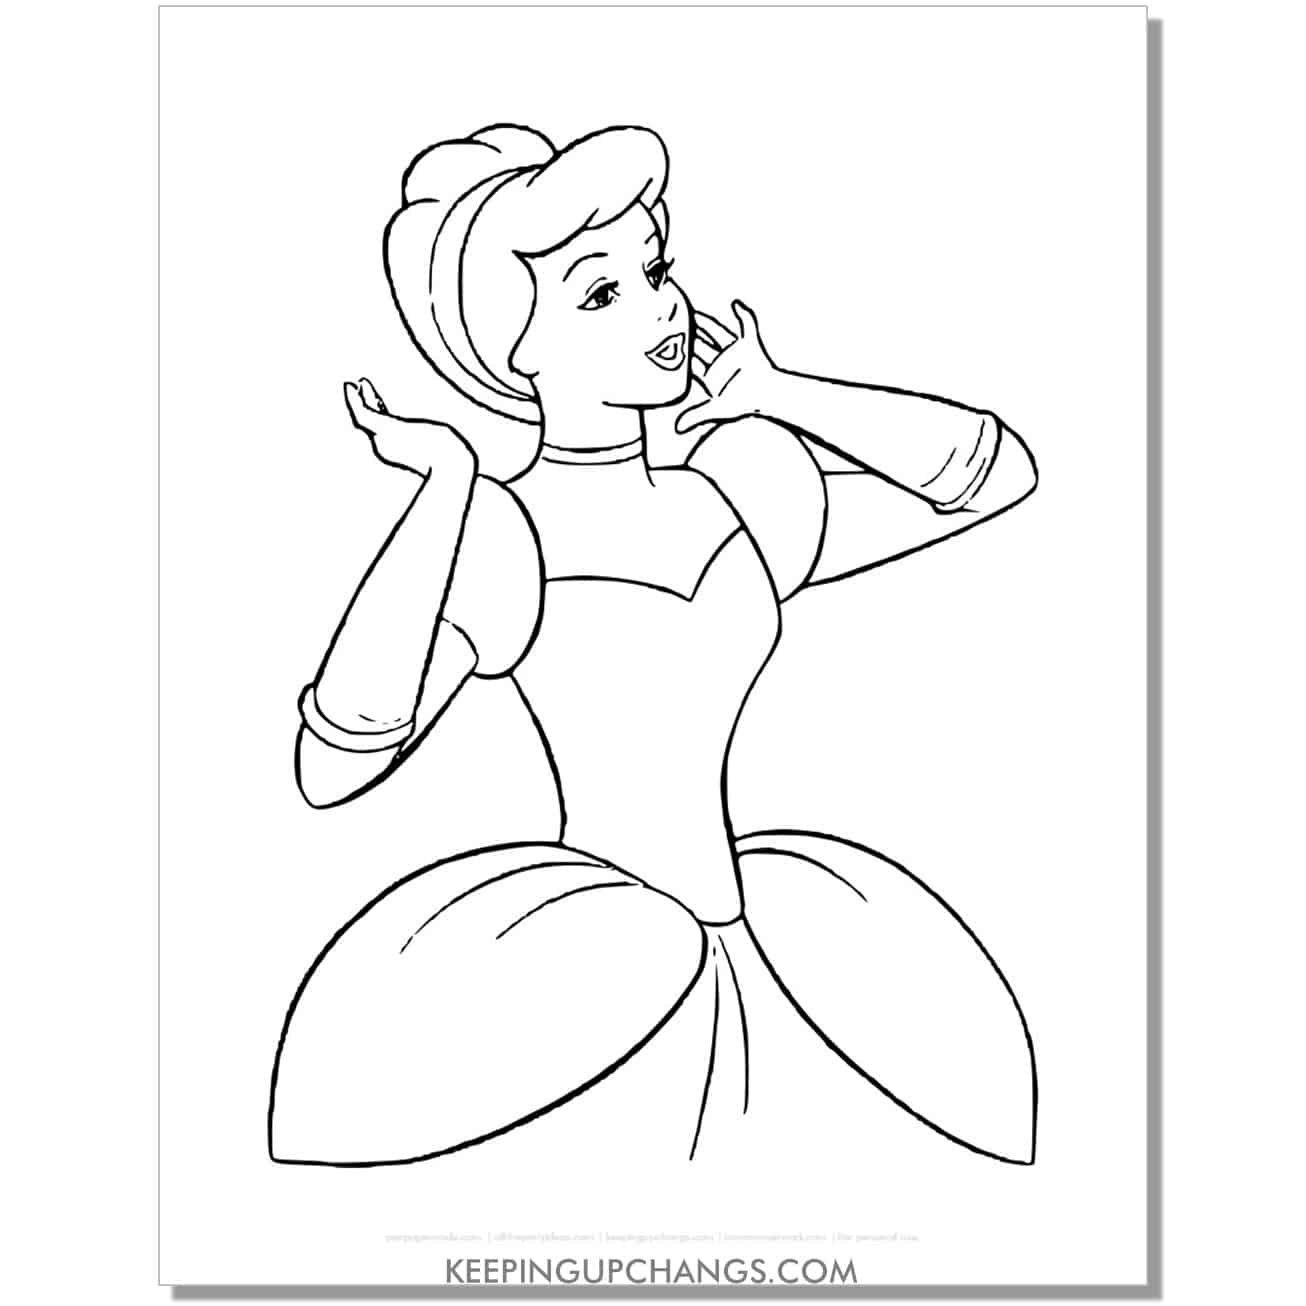 cinderella getting hair done for ball coloring page, sheet.